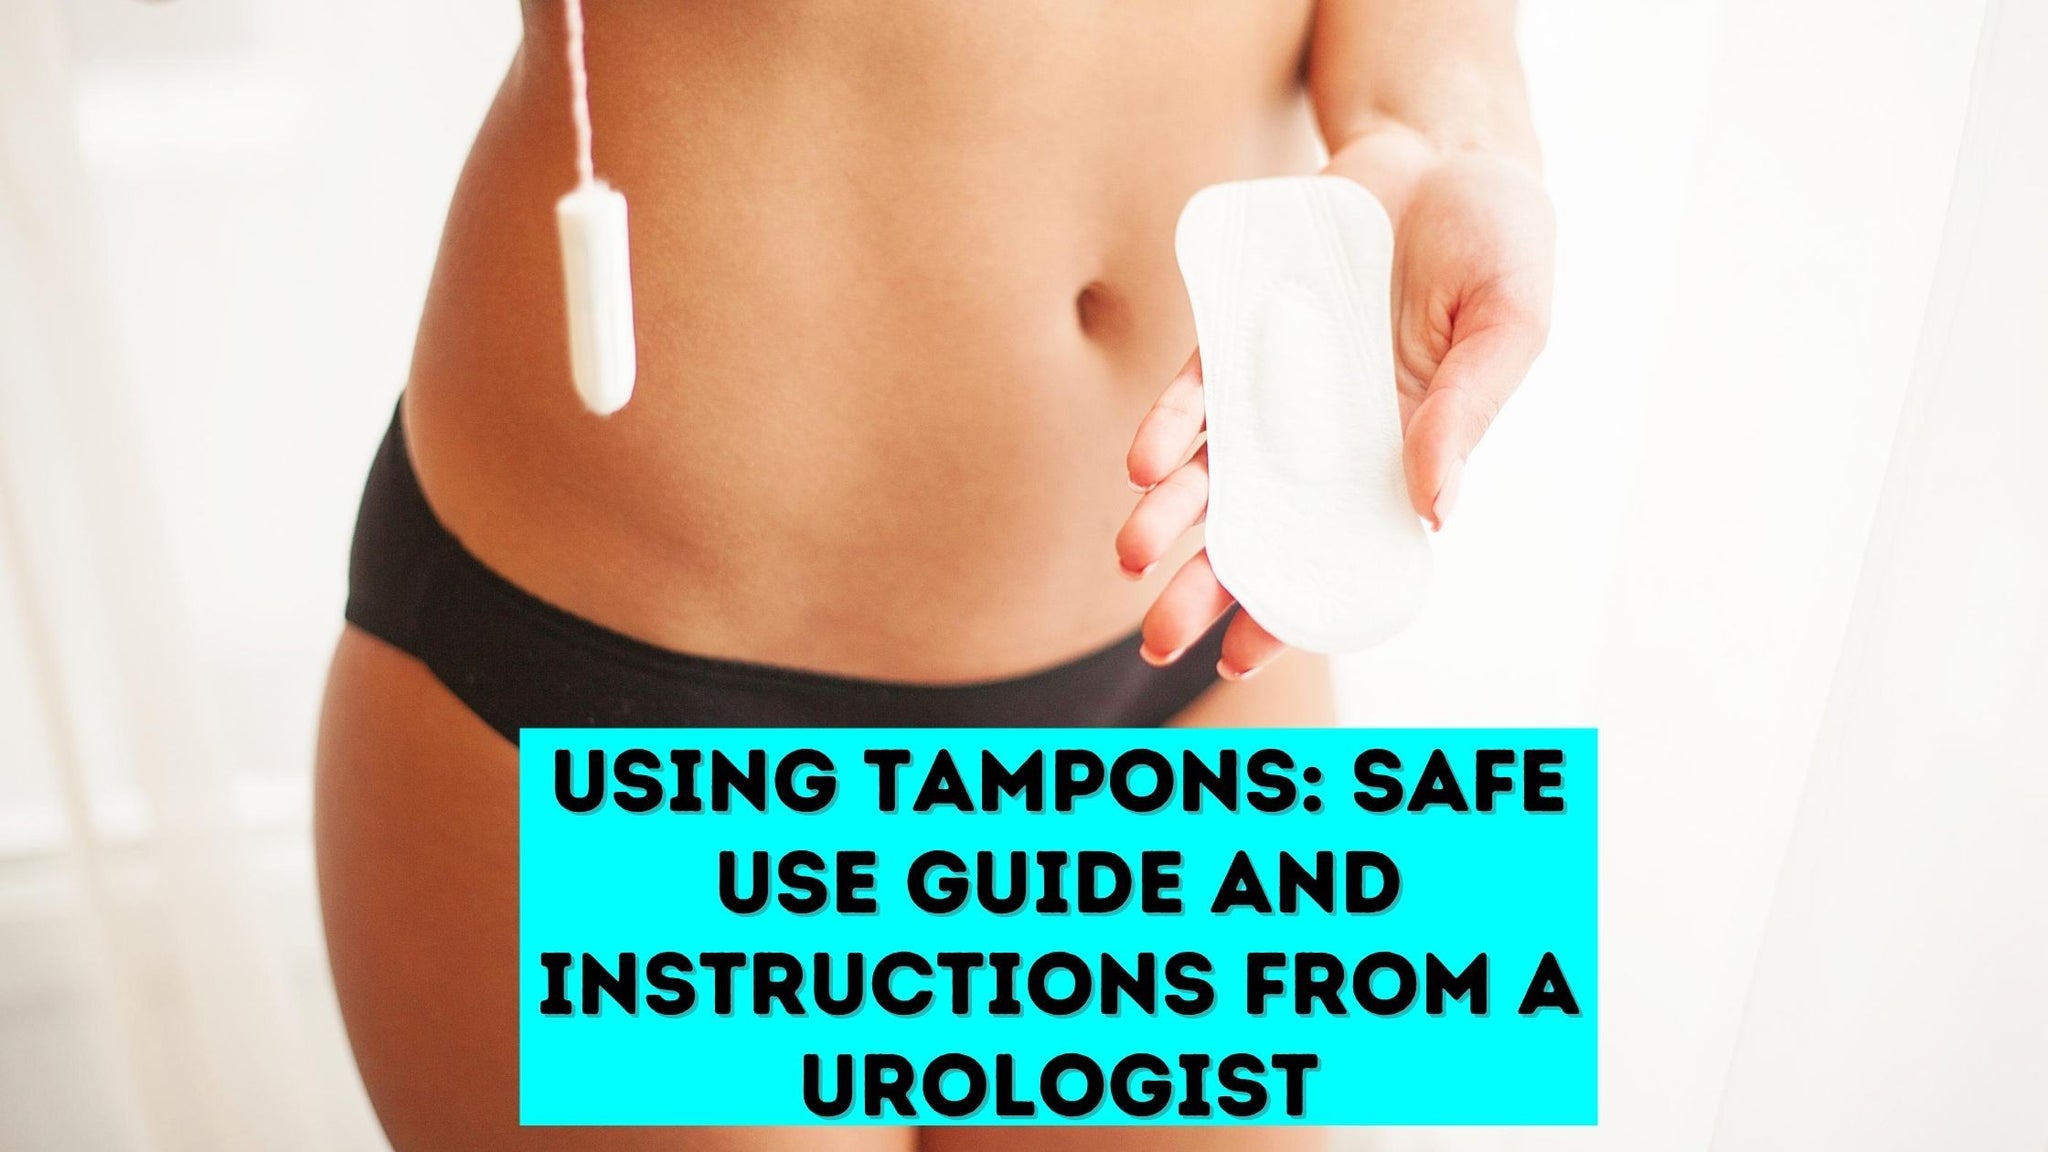 How to Use Tampons: Safe Use Guide